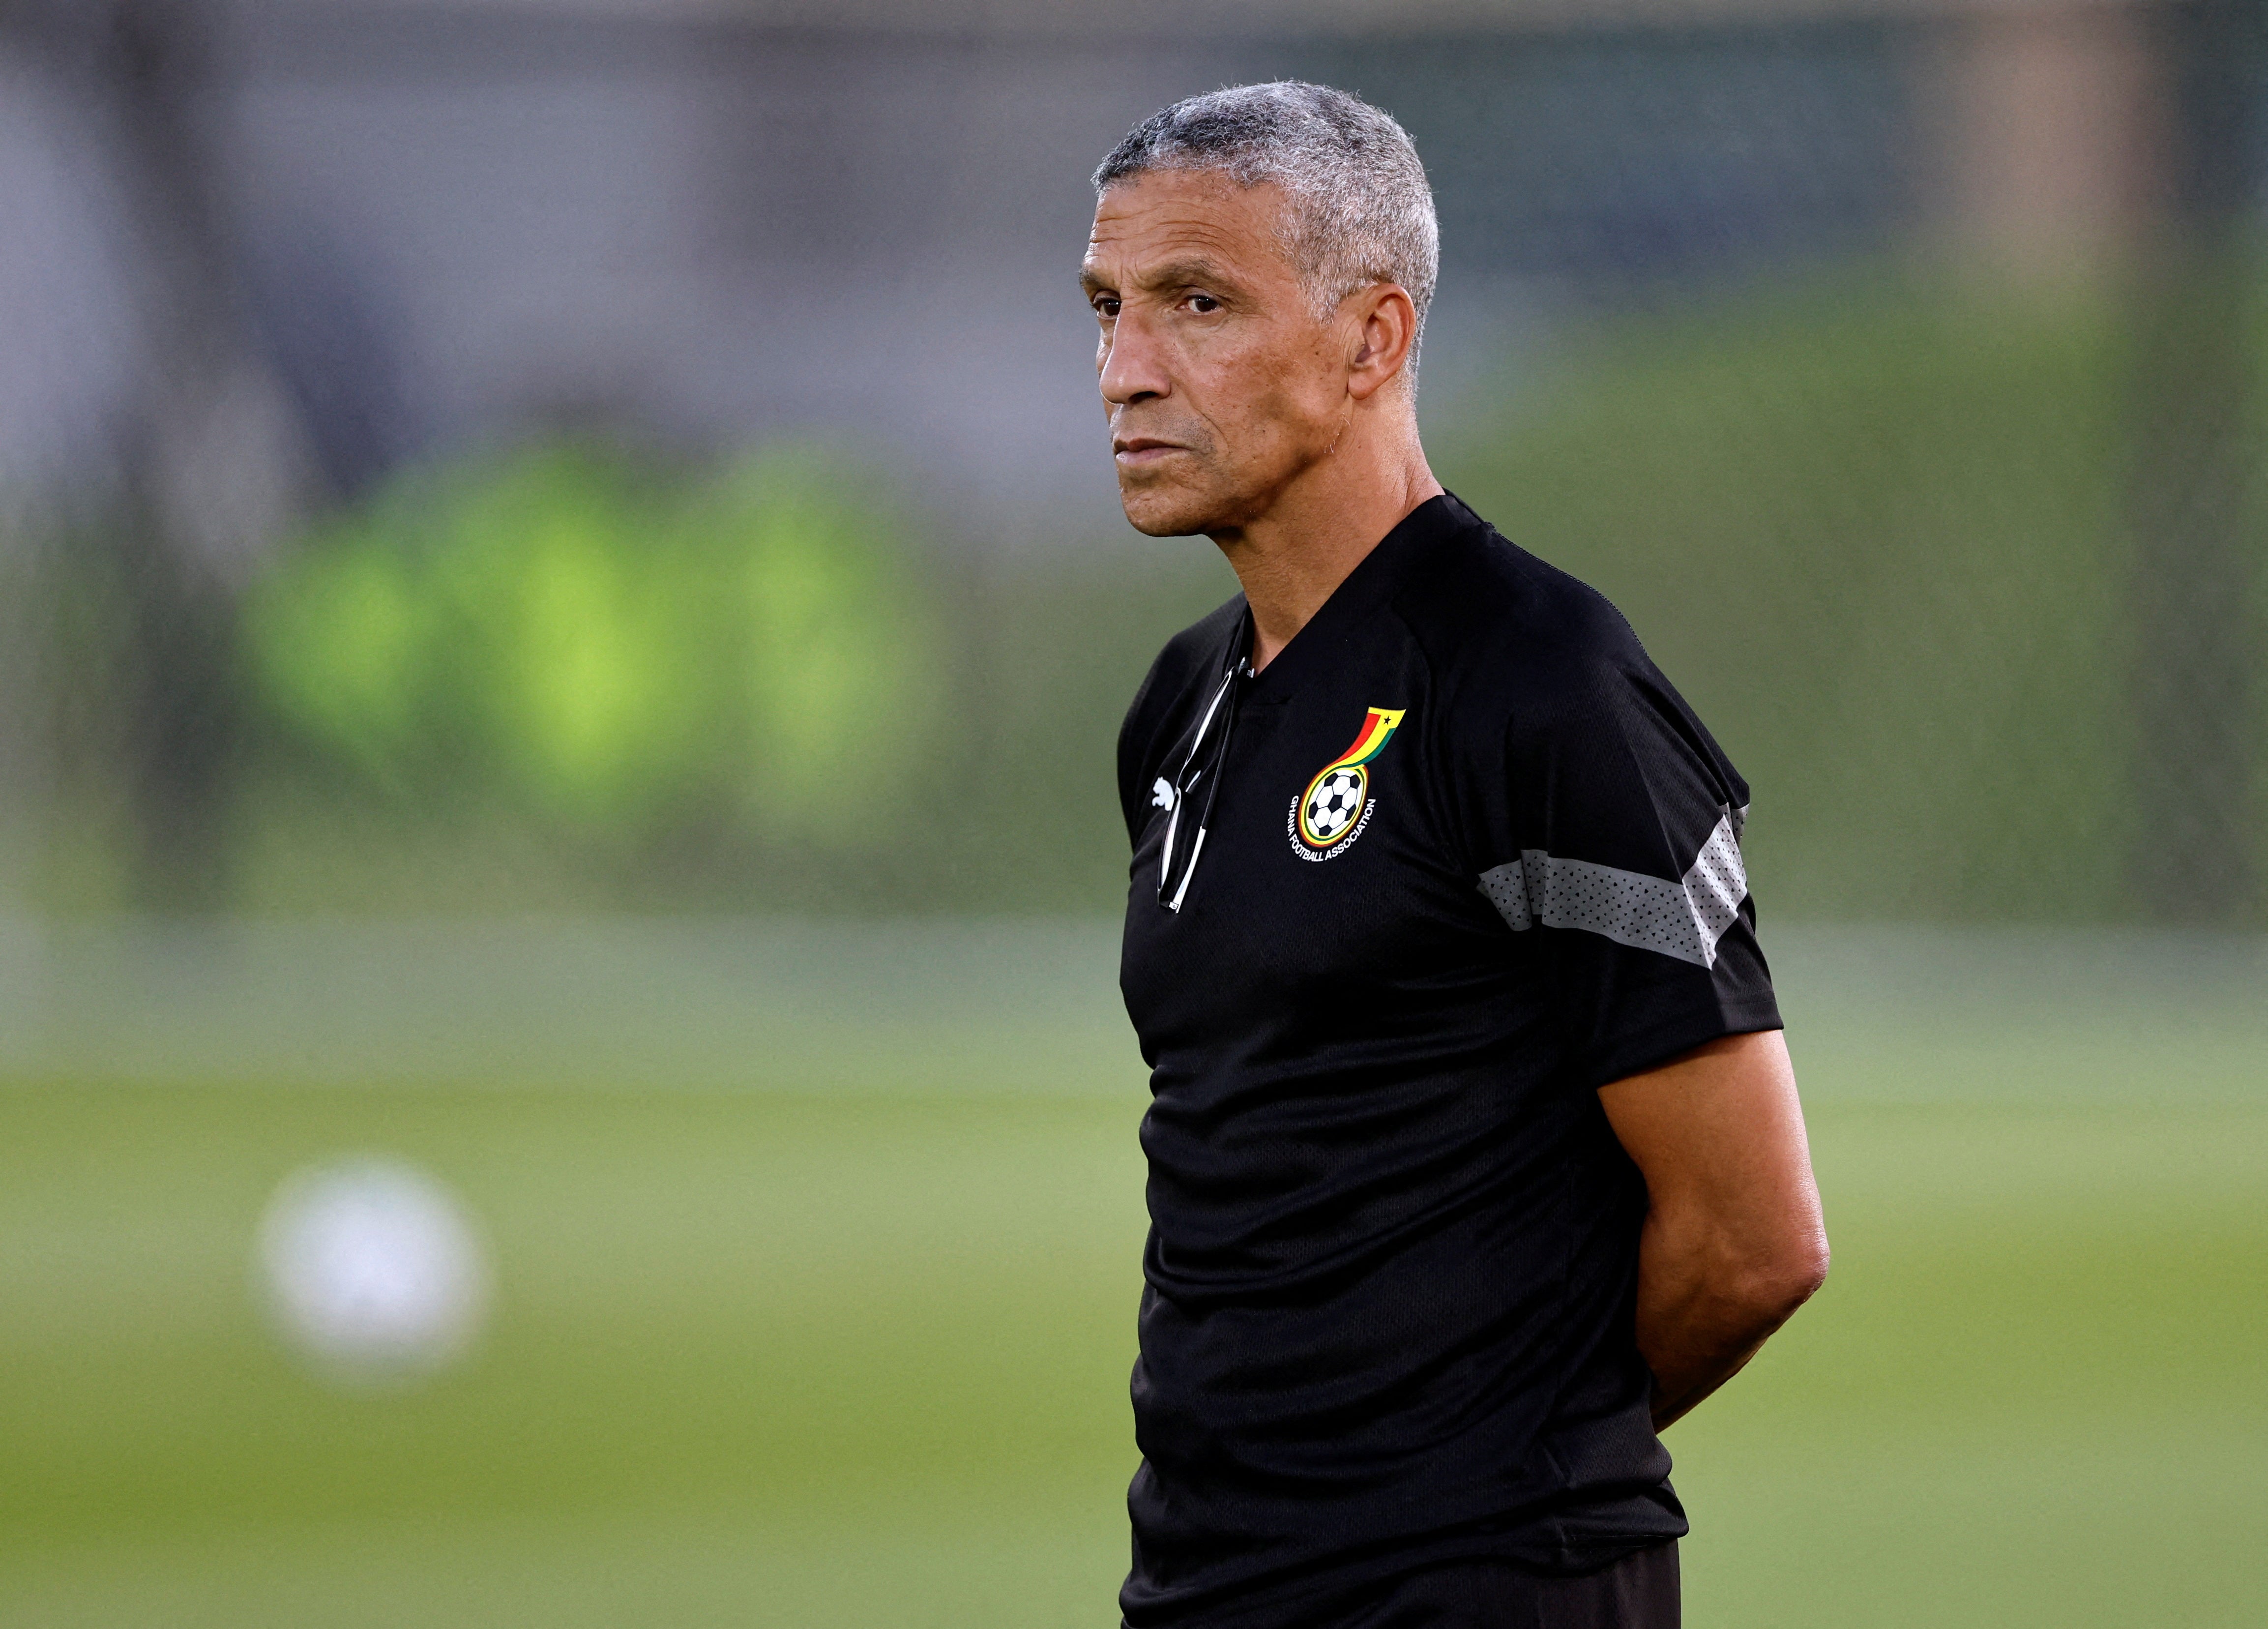 Chris Hughton has been relieved of his duties as Ghana manager